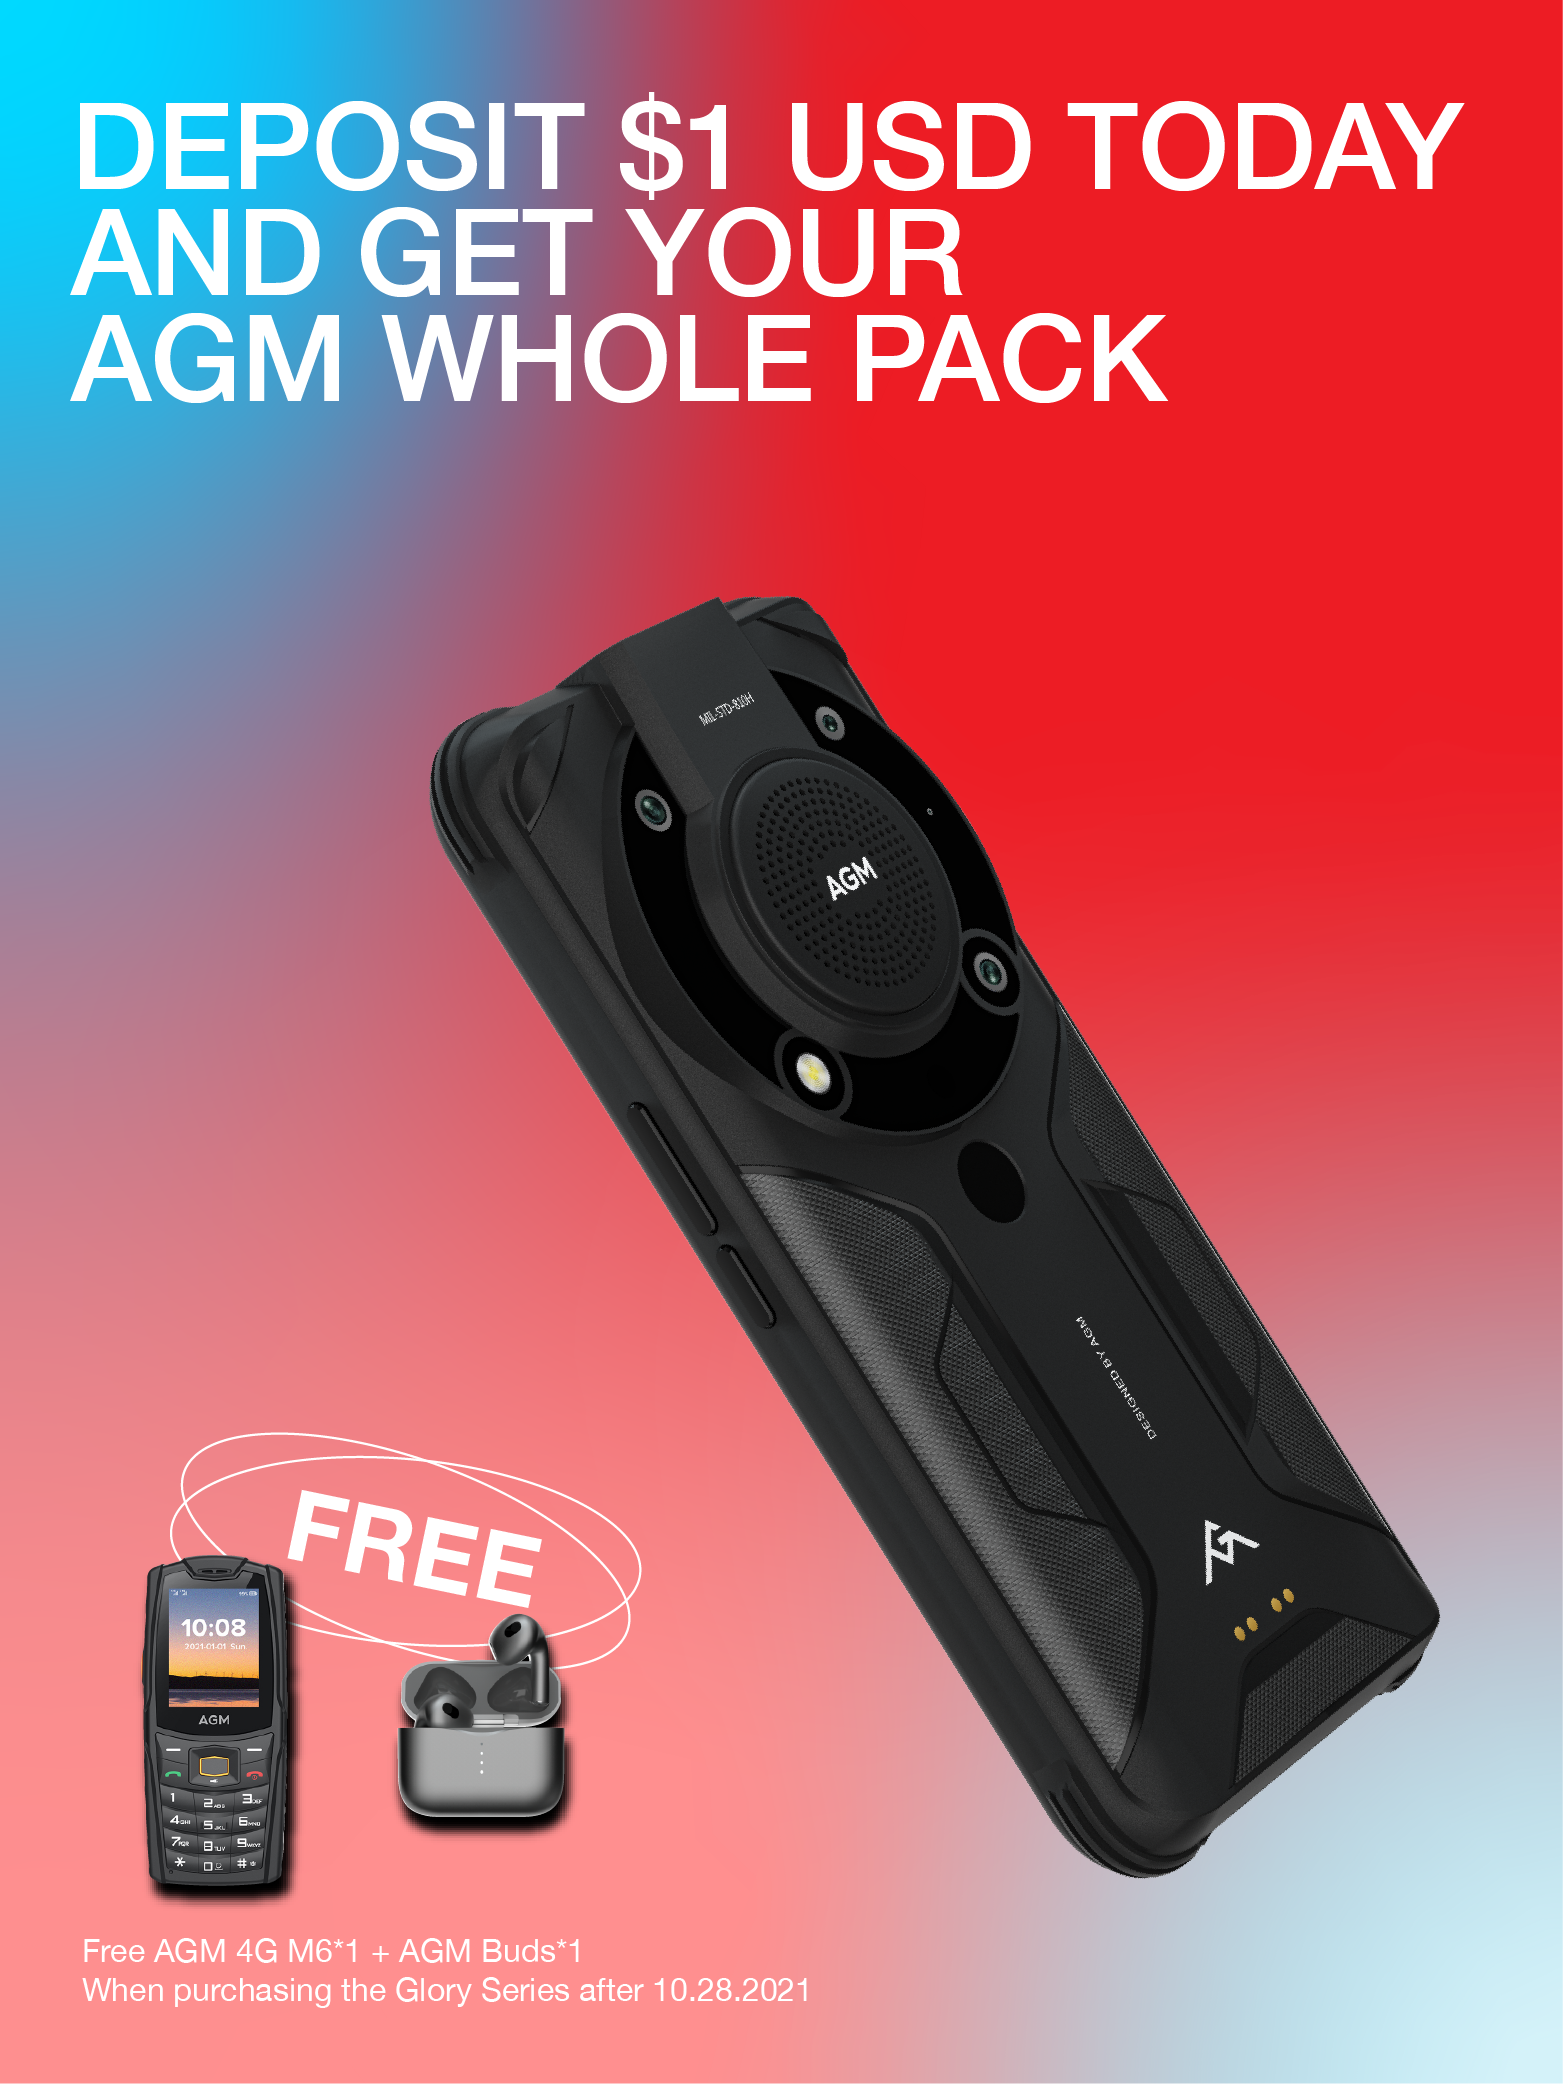 AGM MOBILE LIMITED: PRE-ORDER AGM Glory, and Get Free AGM M6 & AGM Buds